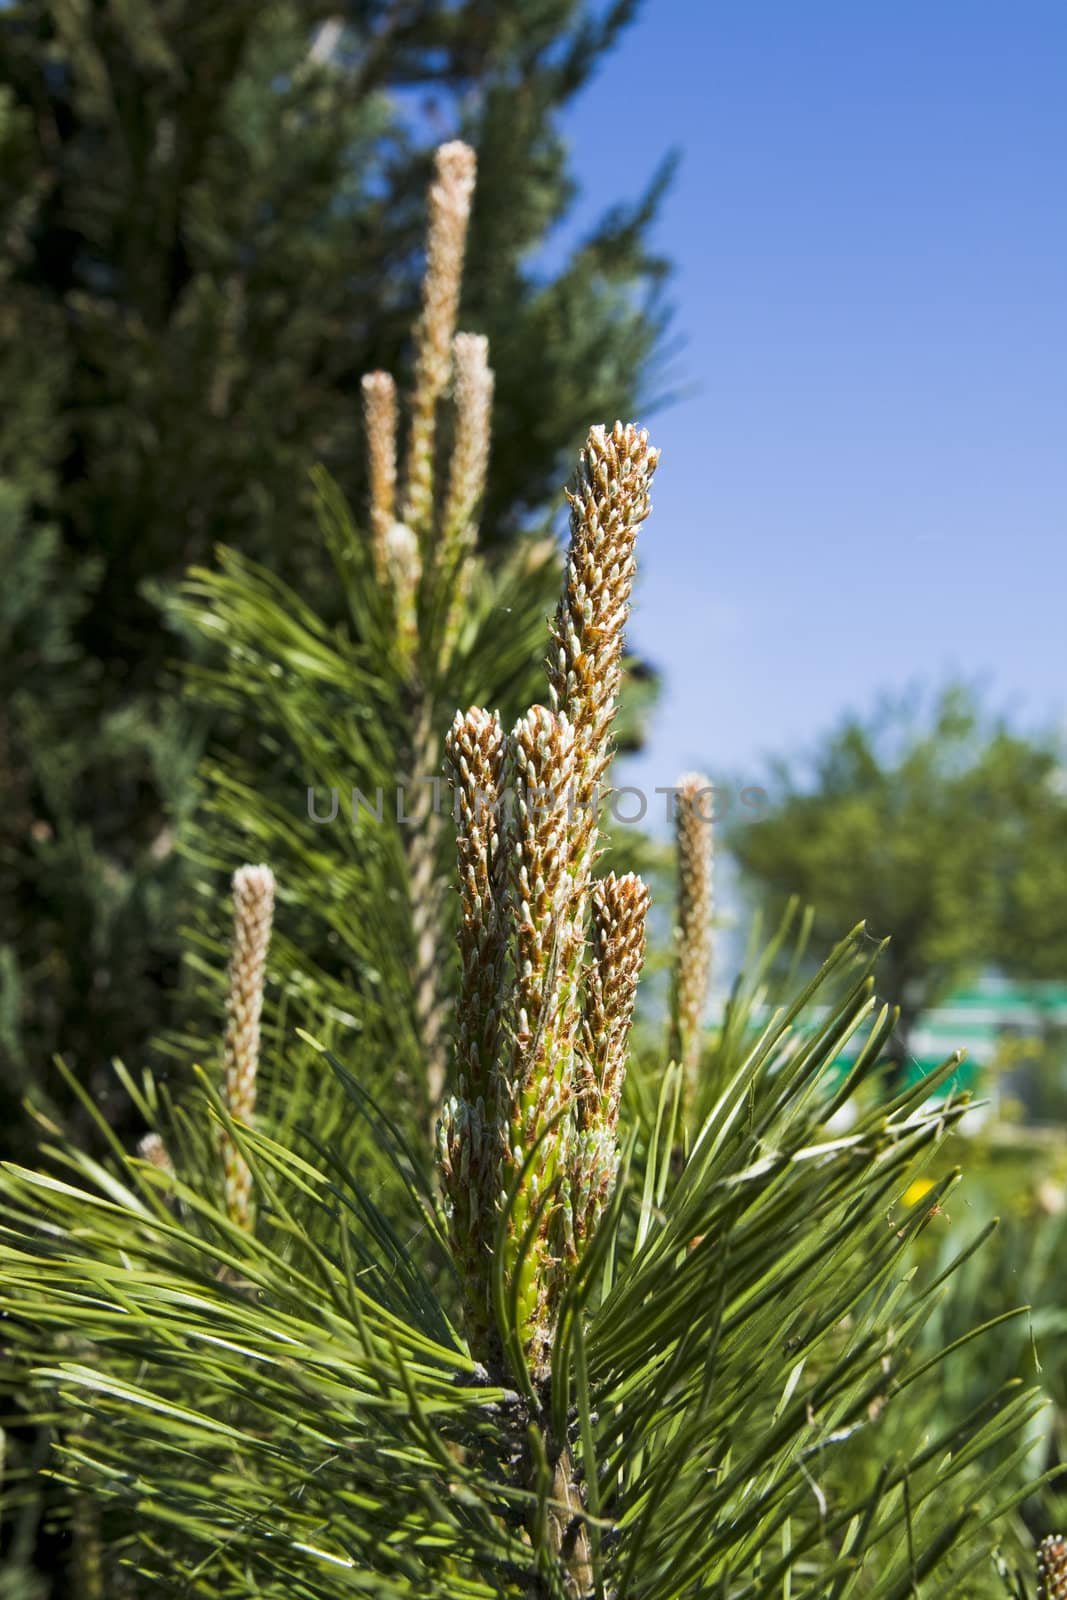 Image of a mountain pine bud under sunlight